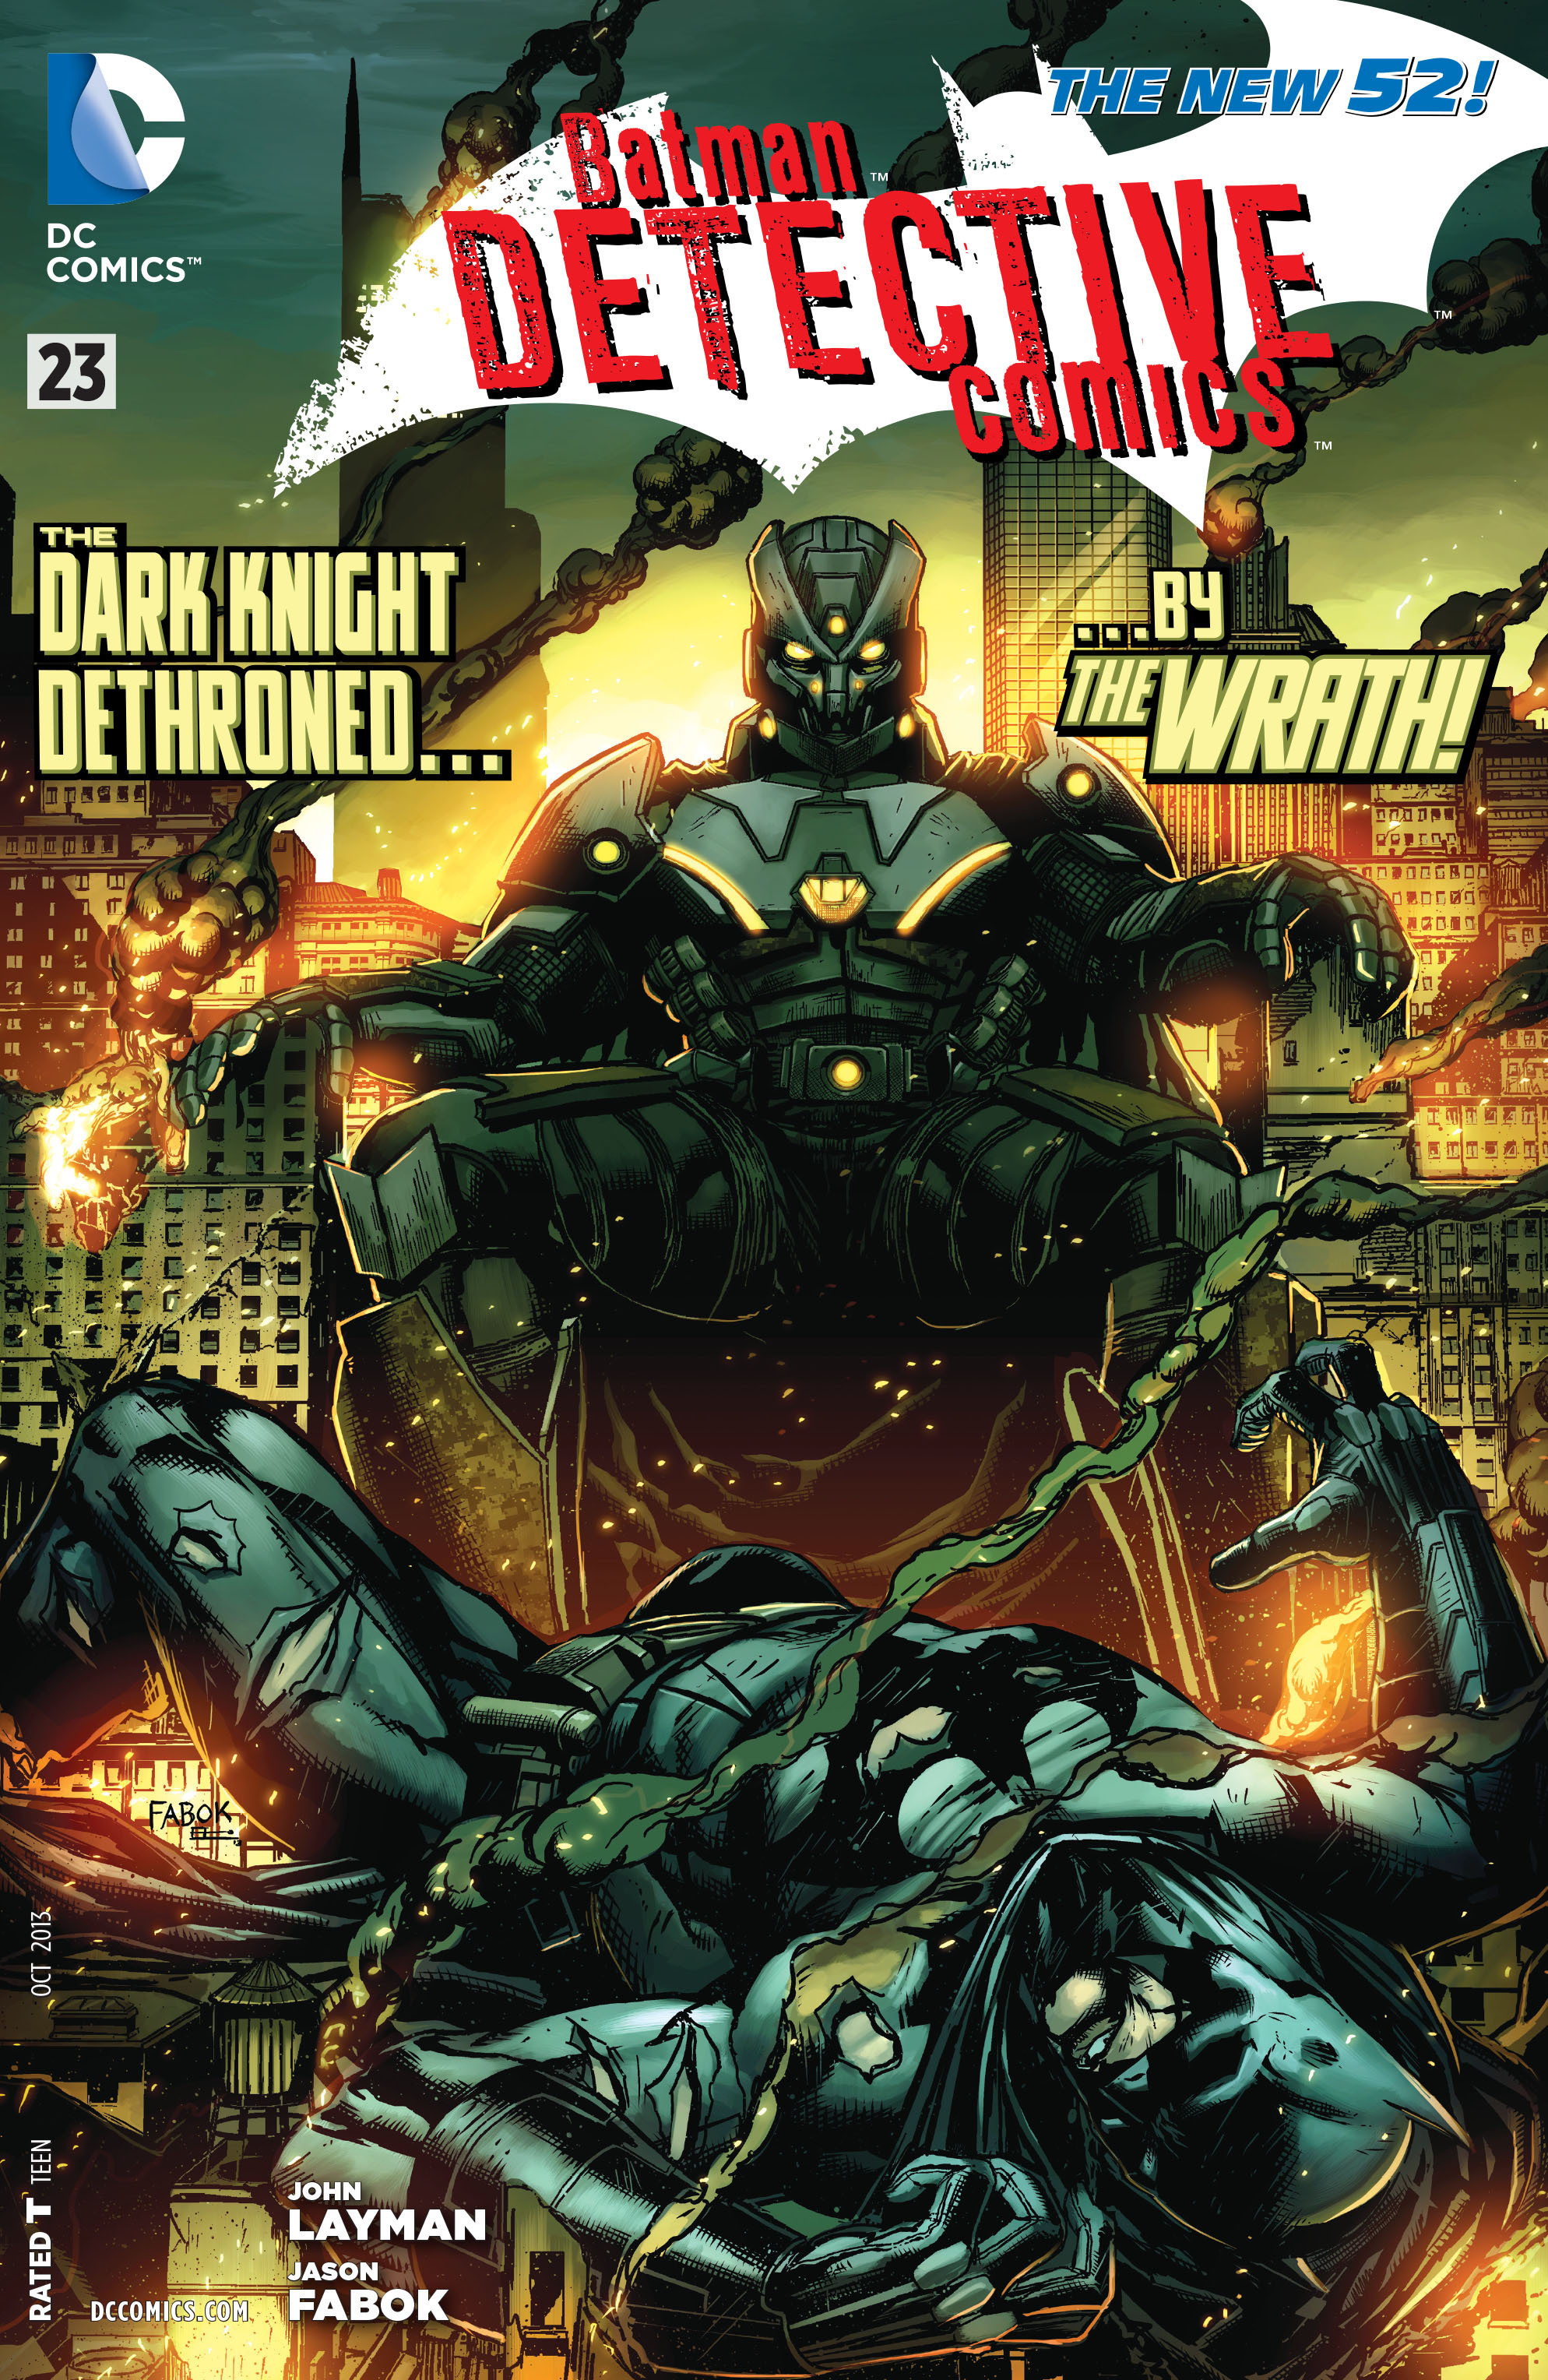 Detective Comics 2011 Issue 23 | Read Detective Comics 2011 Issue 23 comic  online in high quality. Read Full Comic online for free - Read comics online  in high quality .| READ COMIC ONLINE